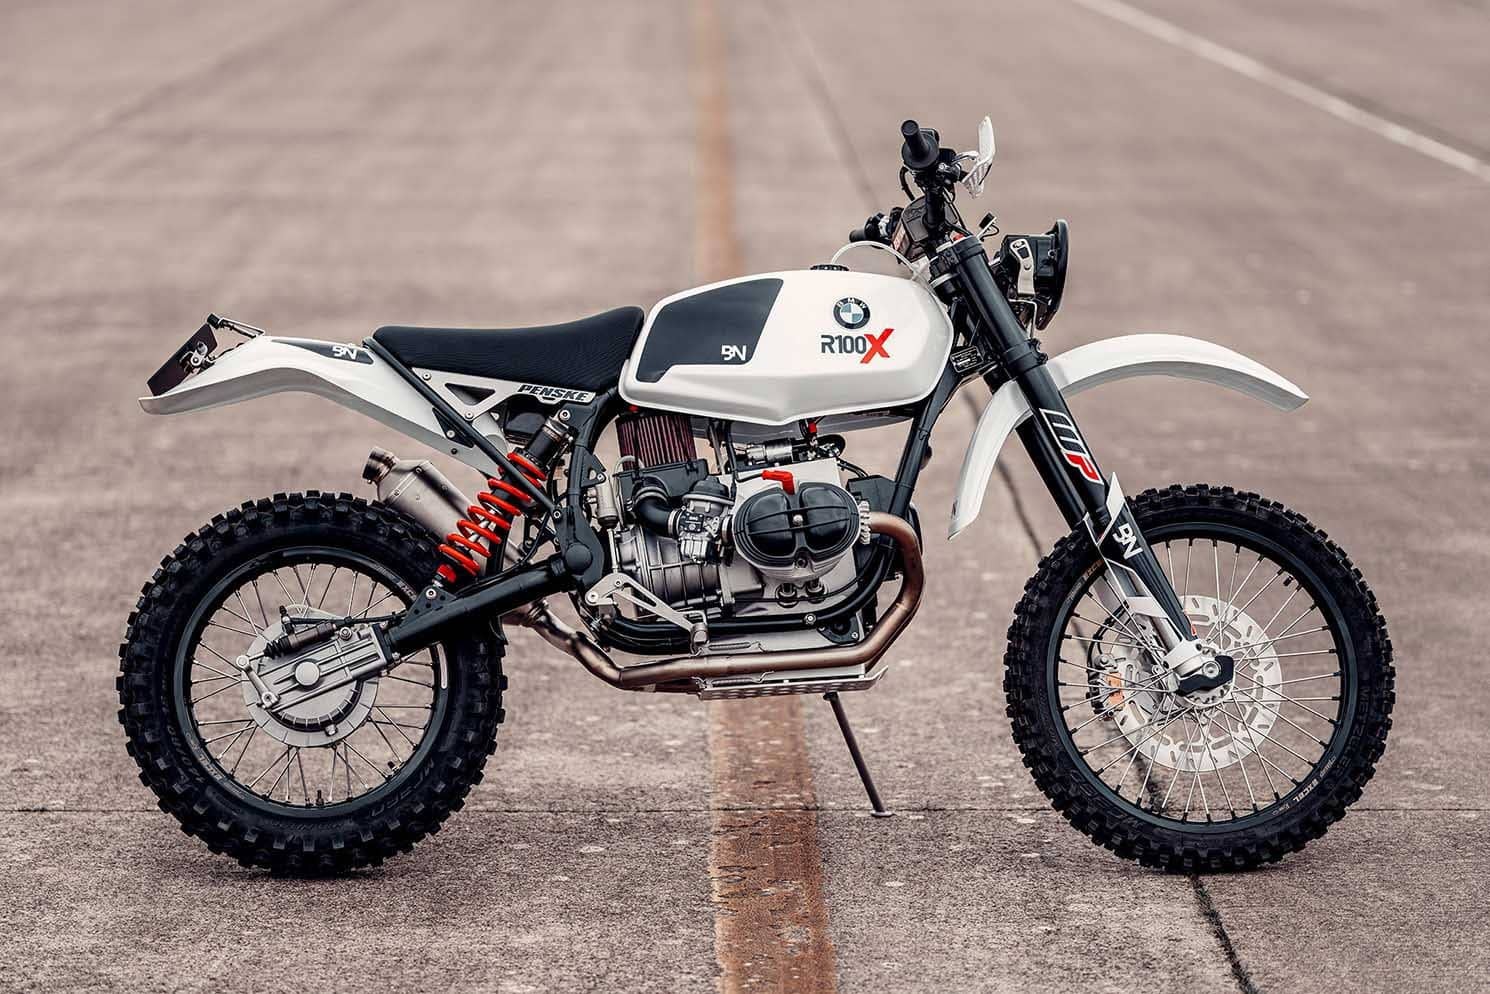 An F1 engineer has taken a classic street BMW and turned it into a brutal dirt bike